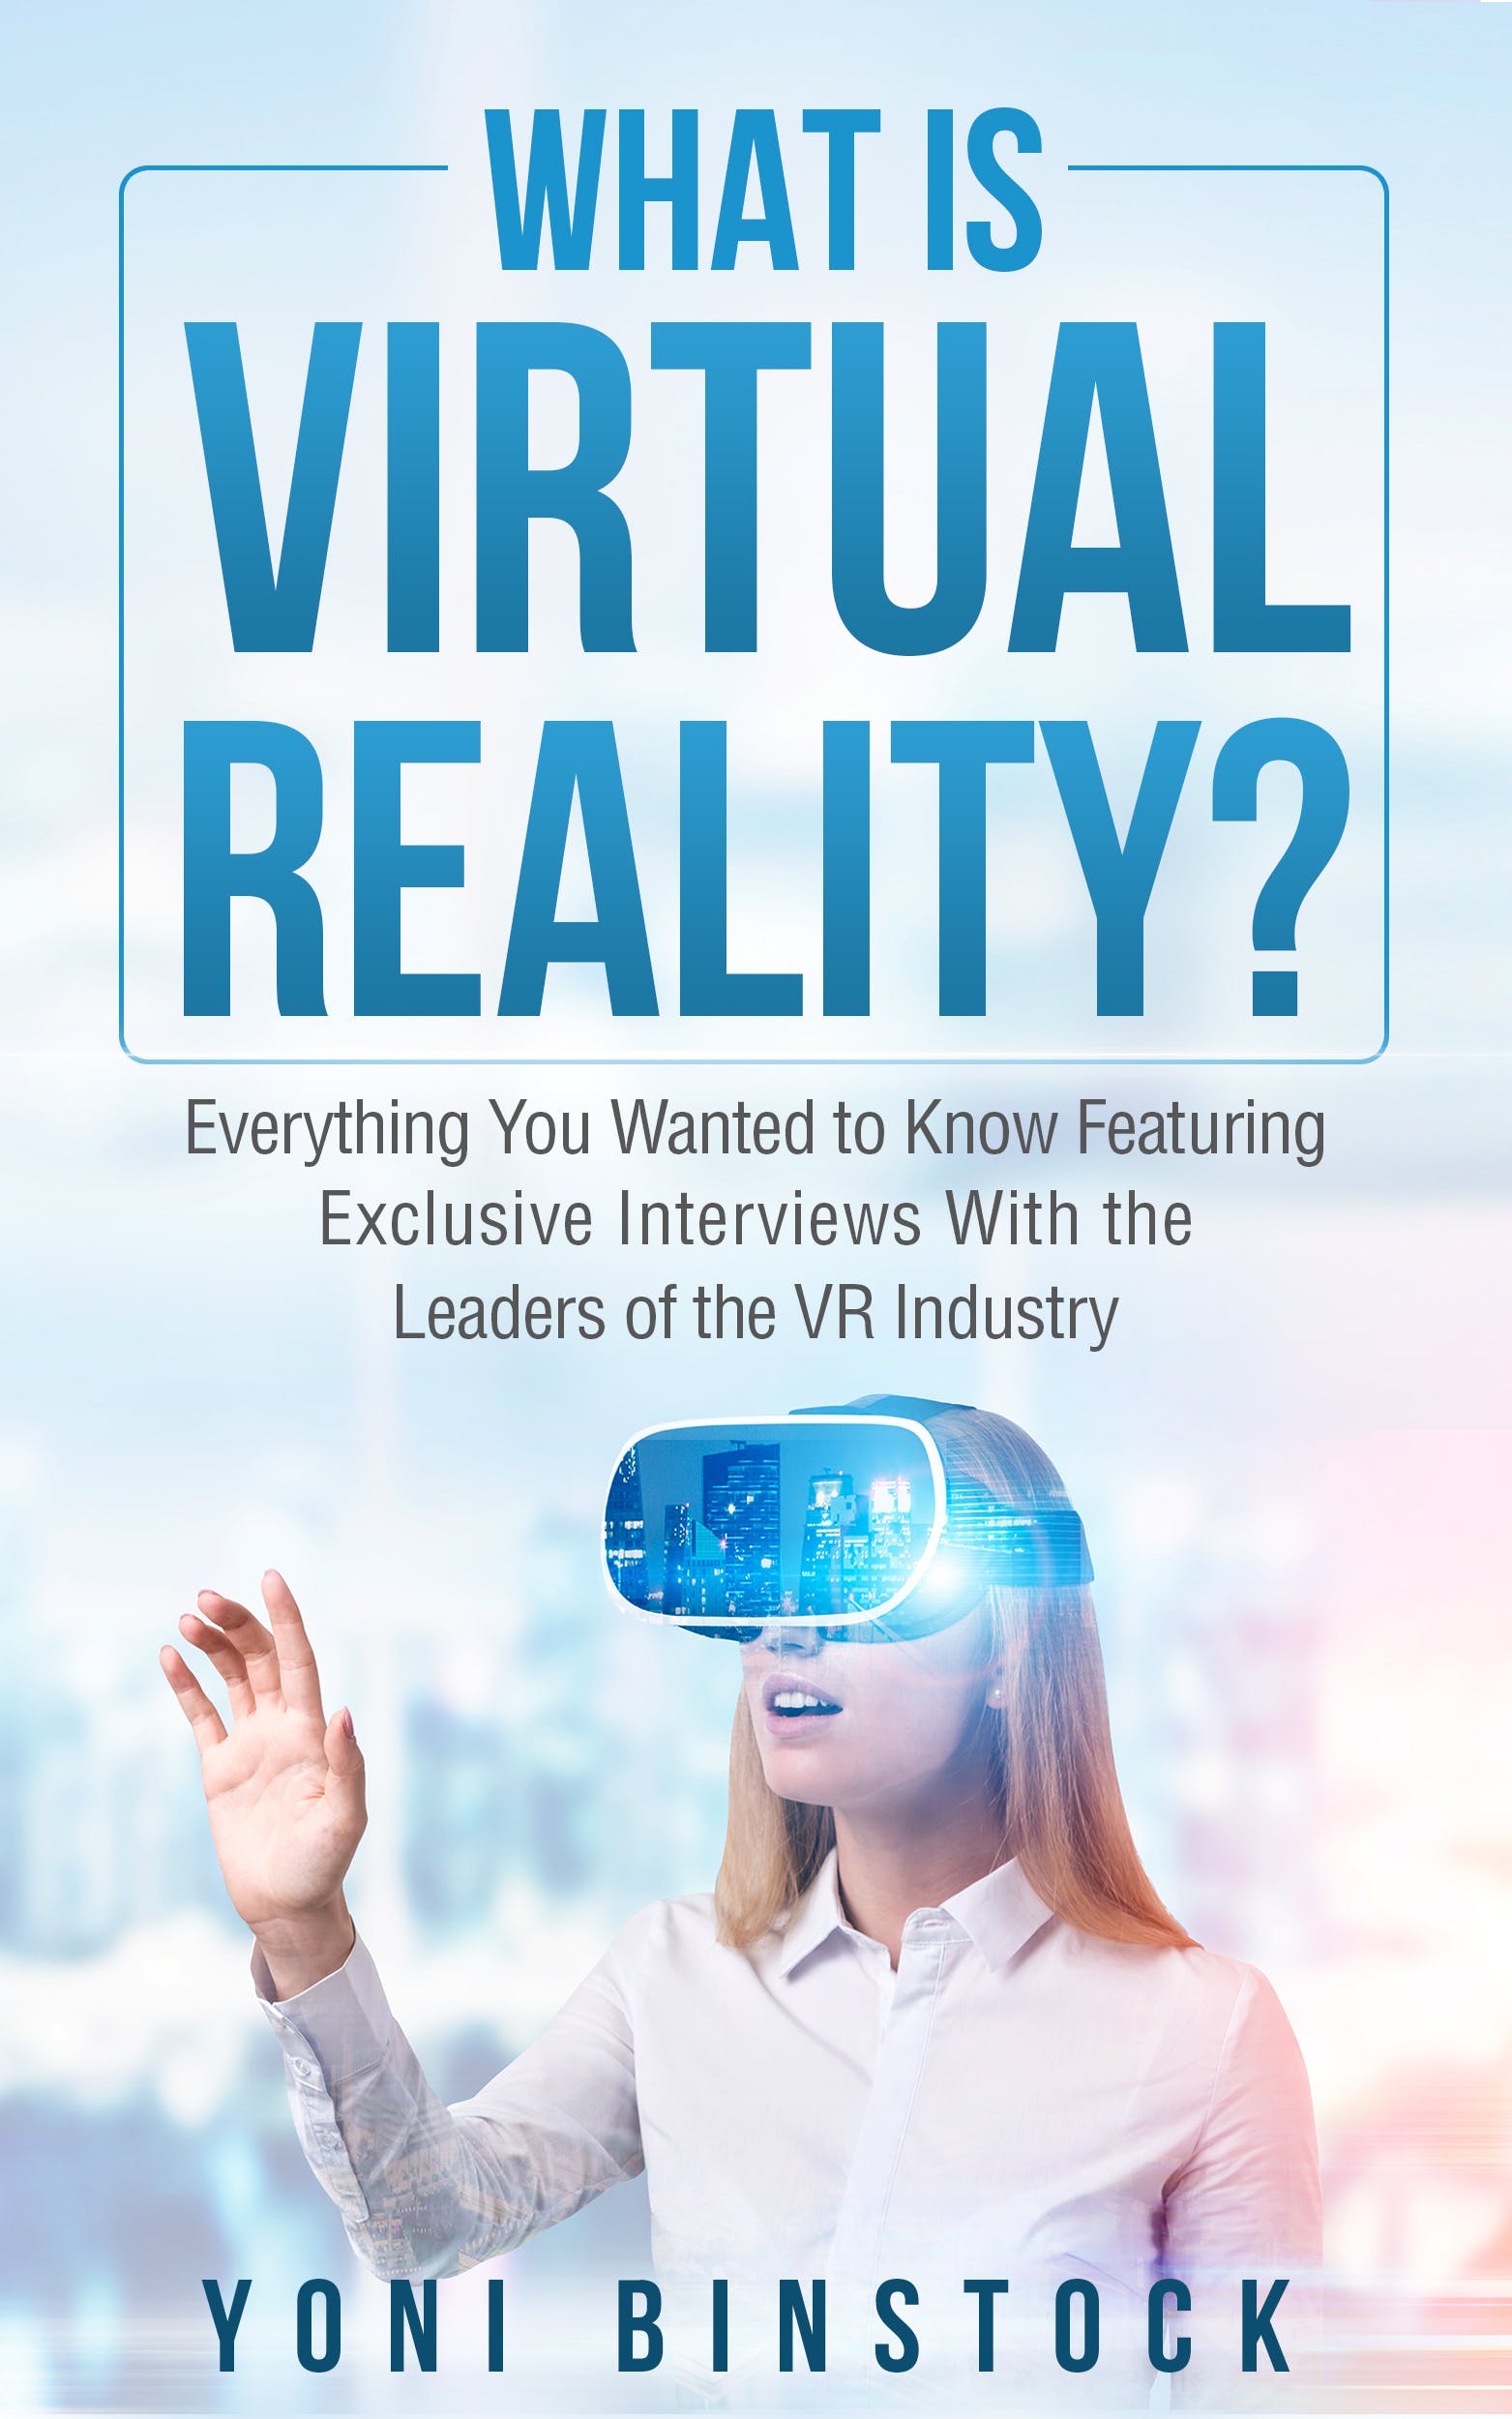 "What is Virtual Reality?" - The Book media 1